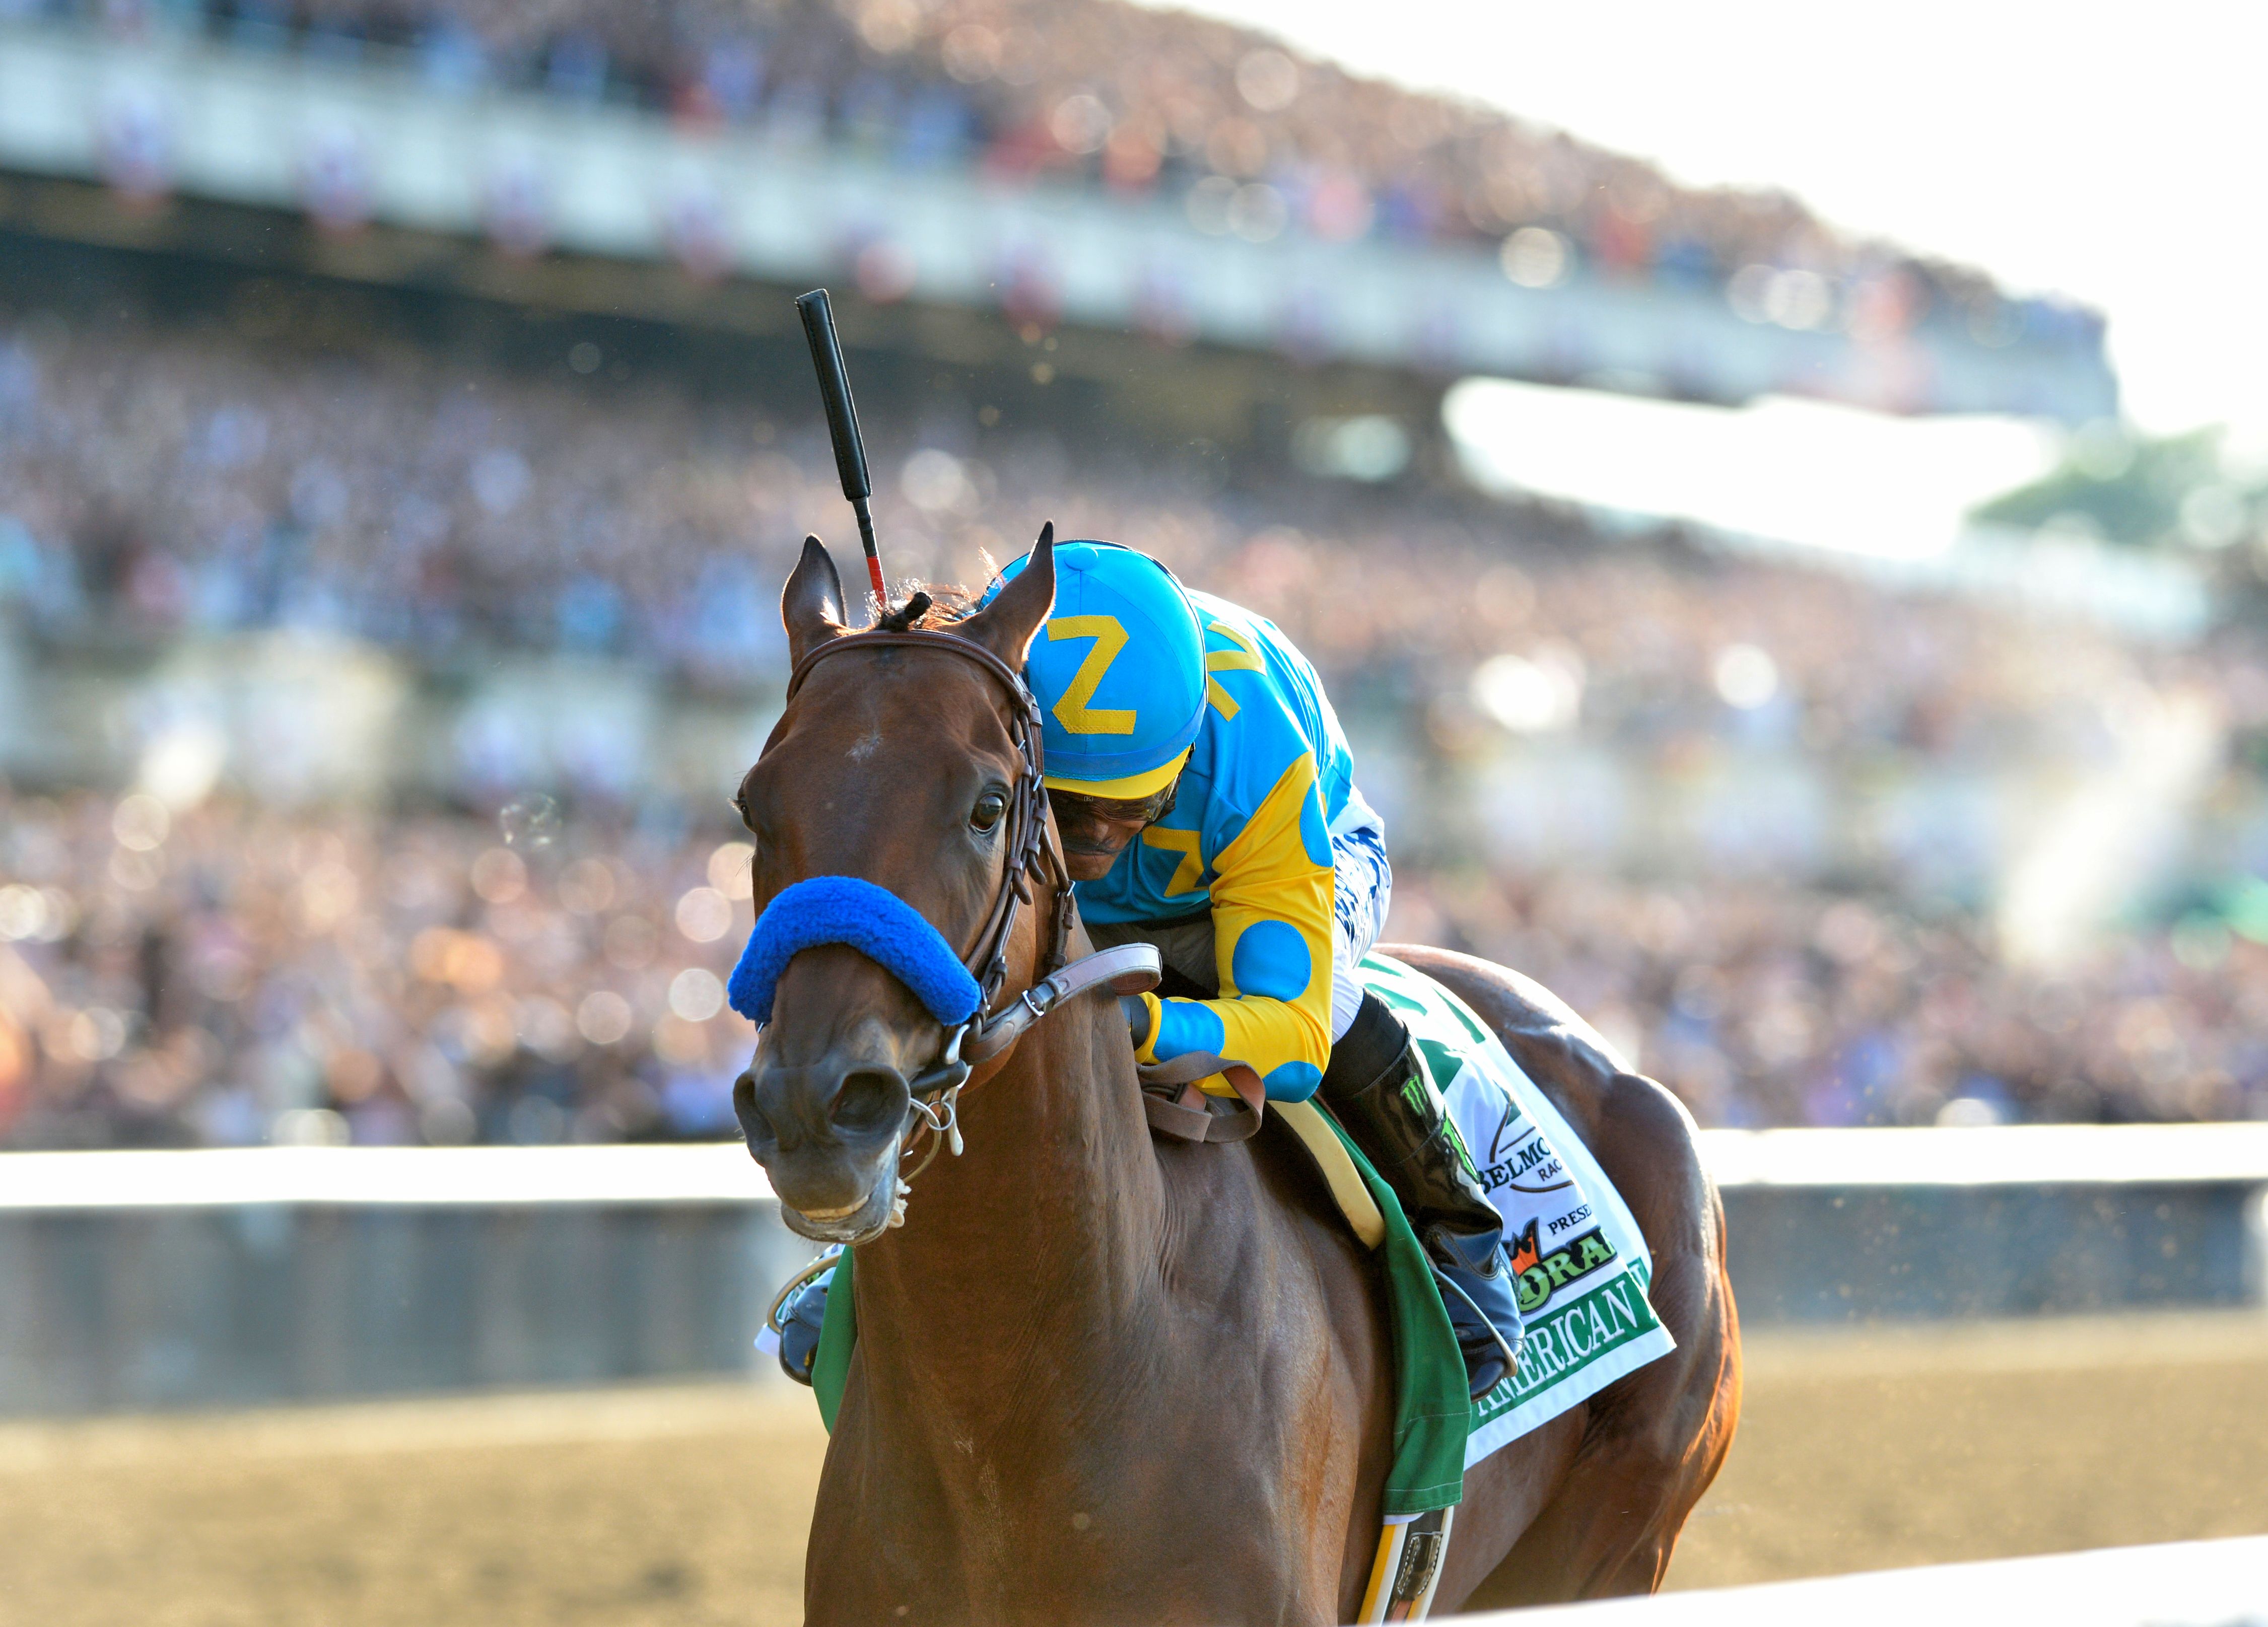 American Pharoah, Victor Espinoza up, winning the 2015 Belmont Stakes to become America's 12th Triple Crown winner (NYRA)